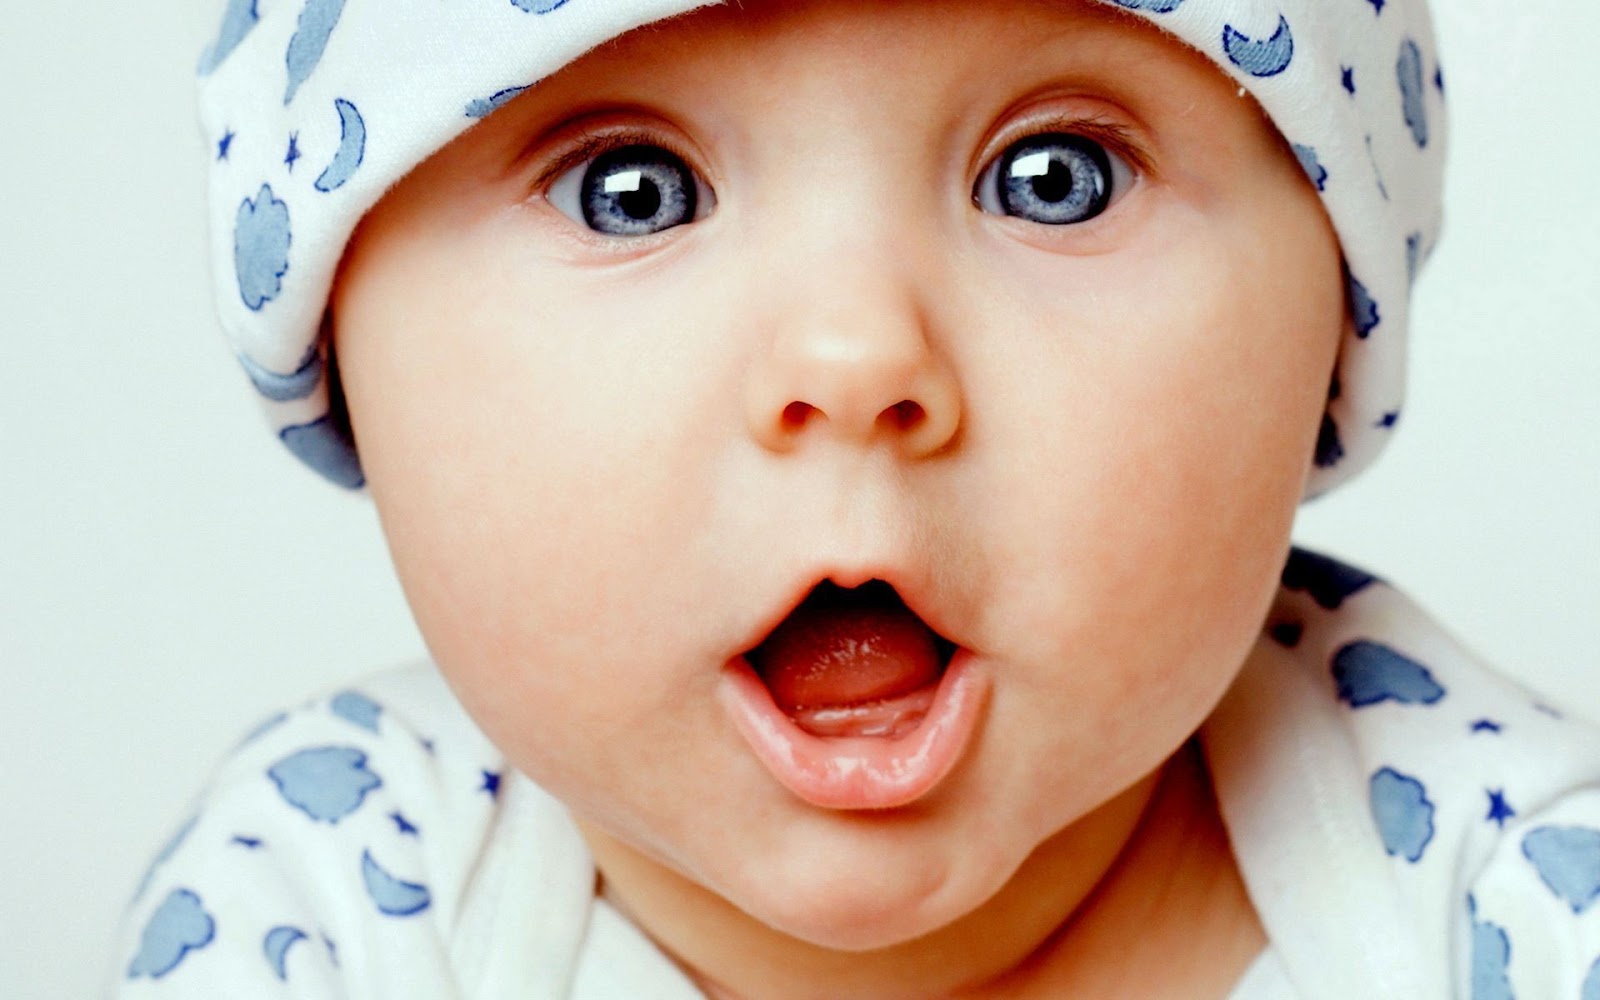 People___Children___Surprise_on_the_face_of_the_child_054096_.jpg